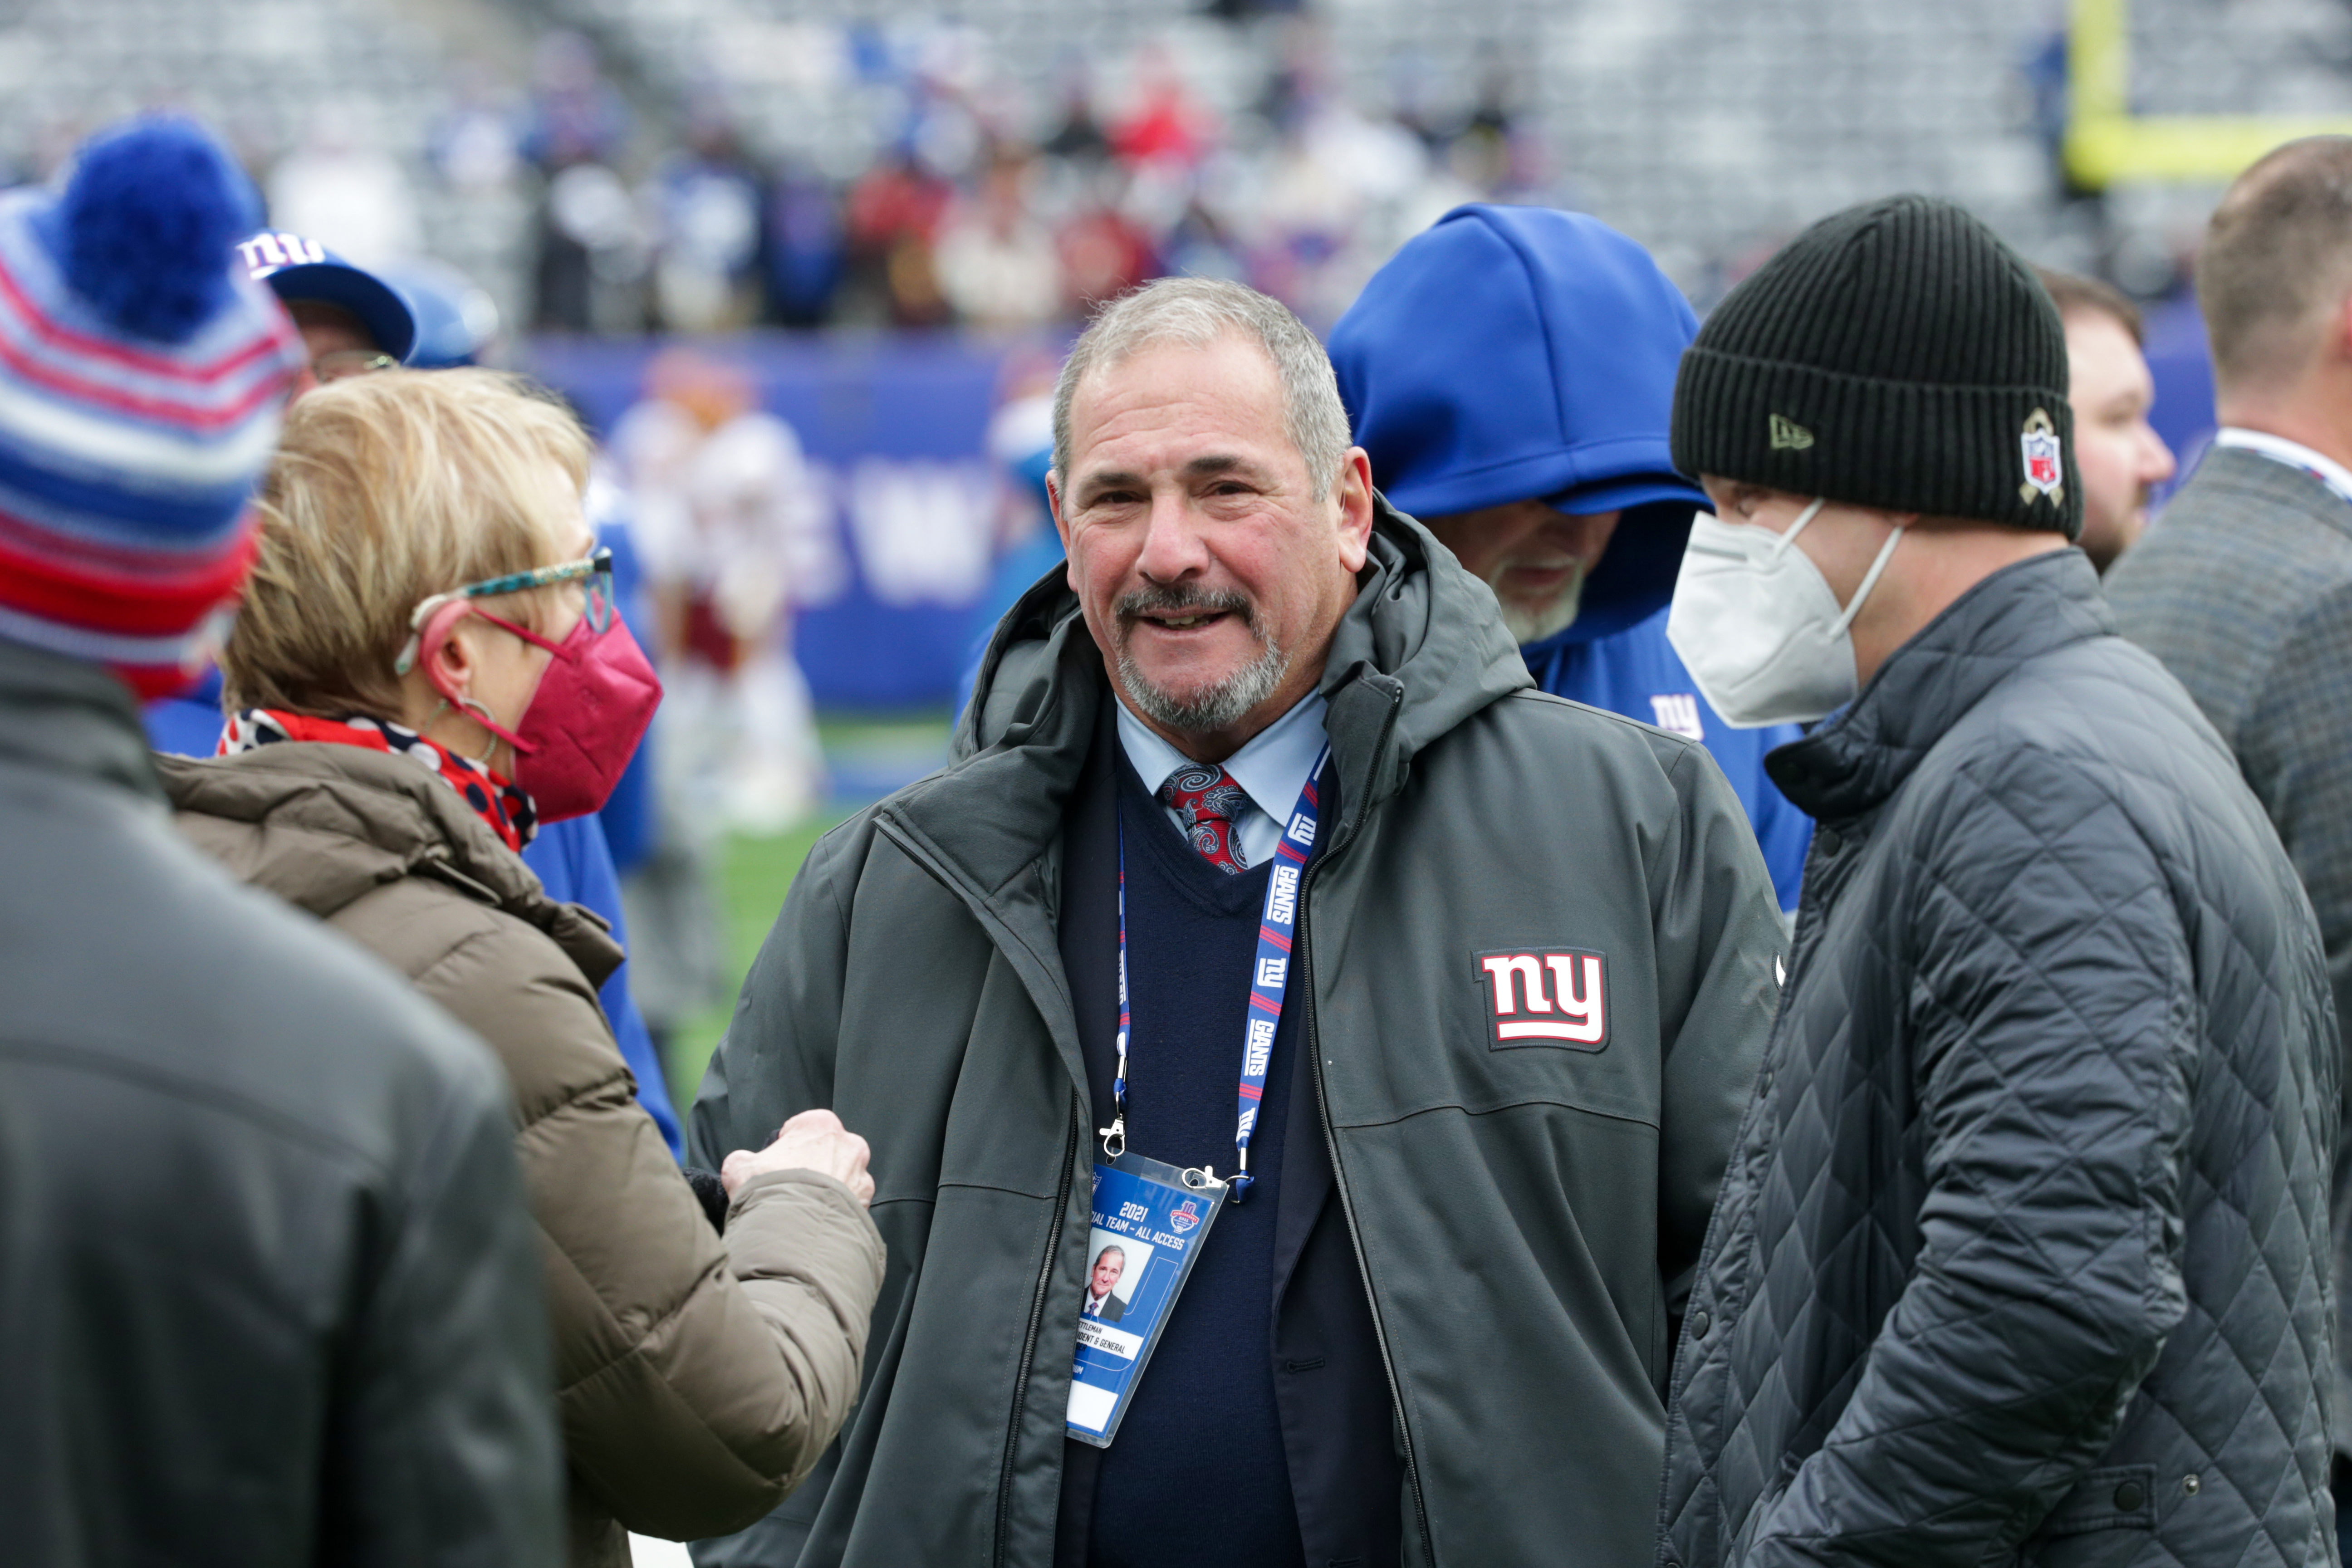 New York Giants general manager Dave Gettleman (center) with his family during pregame warmups as the Giants prepare to host the Washington Football Team on Sunday, Jan. 9, 2022 in East Rutherford, N.J.